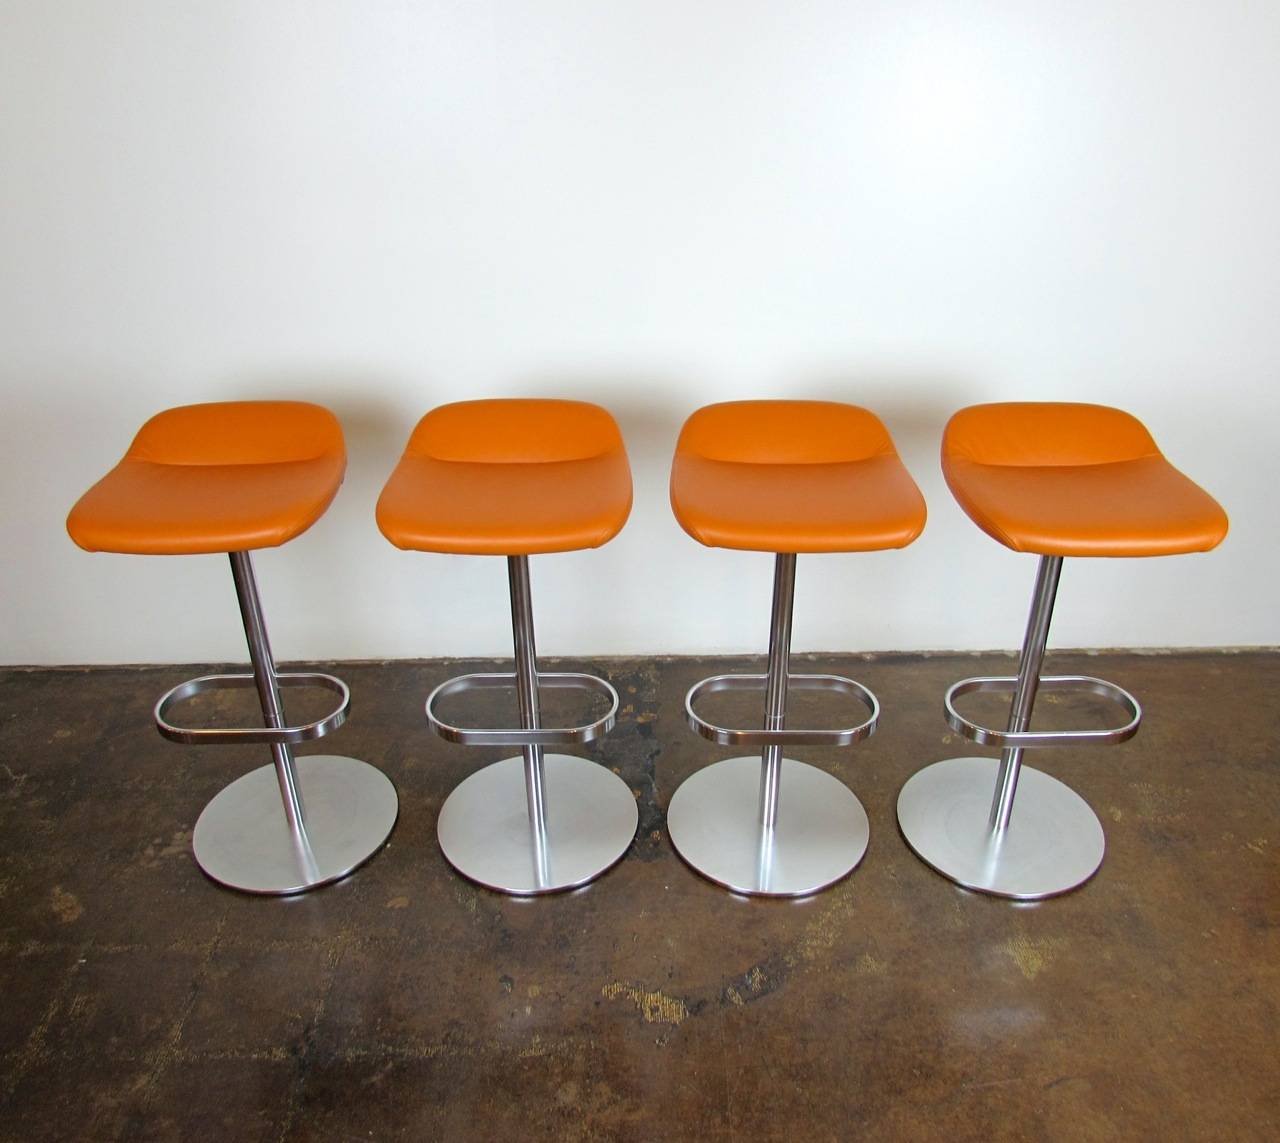 Set of four orange leather, white plastic, and matte polished aluminum Turtle bar stools by PearsonLloyd for Walter Knoll.

Stationary height, swivel bases.